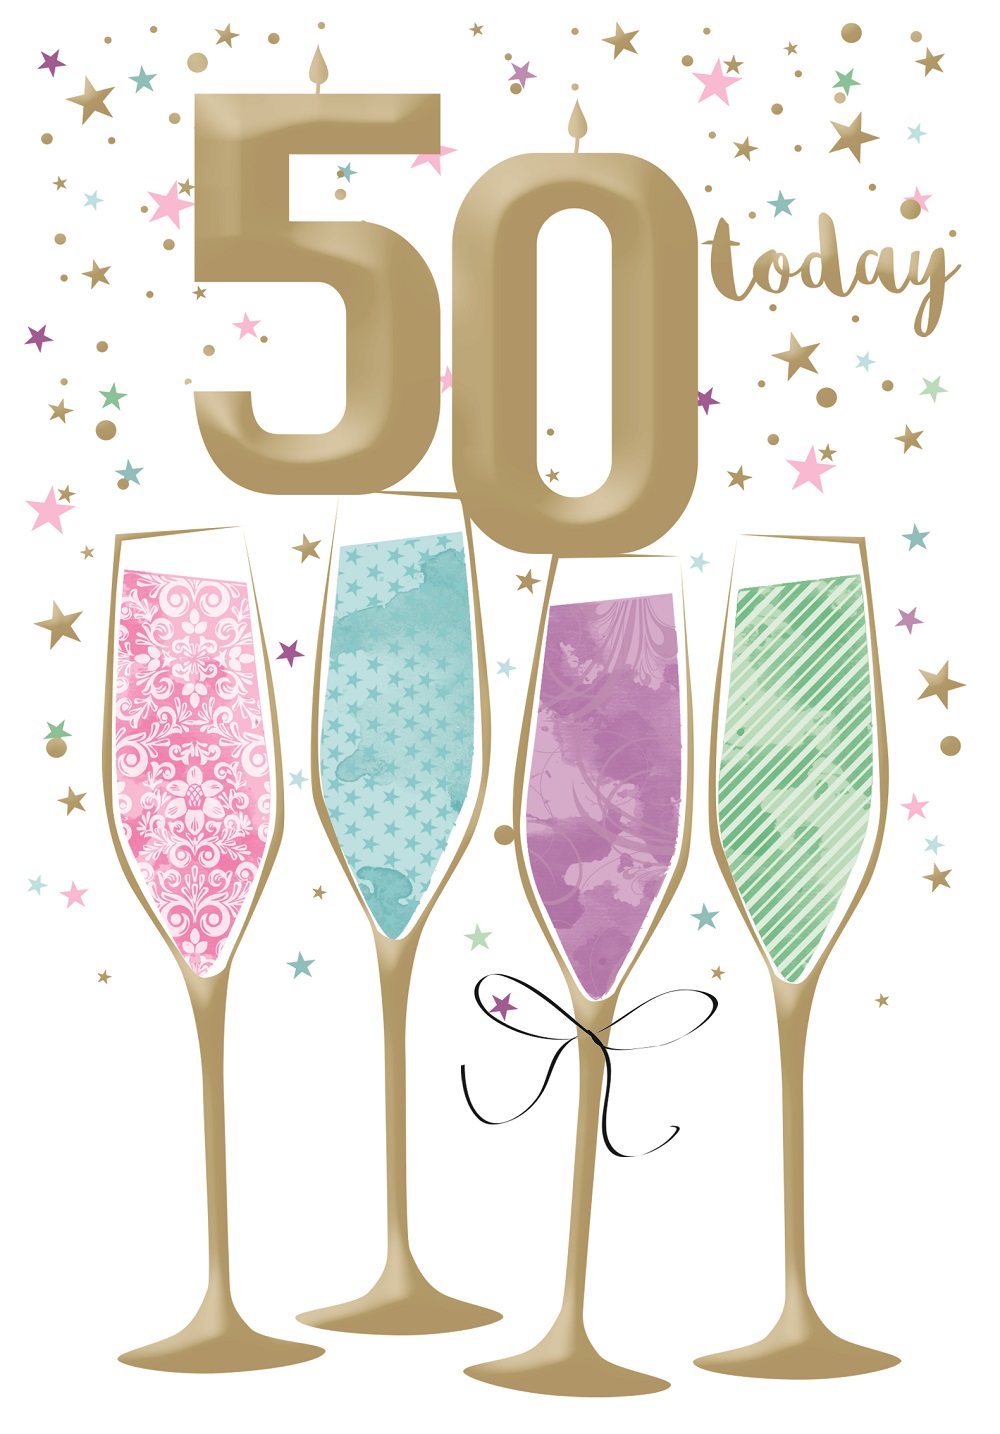 50th Female Greeting Cards - LP Wholesale